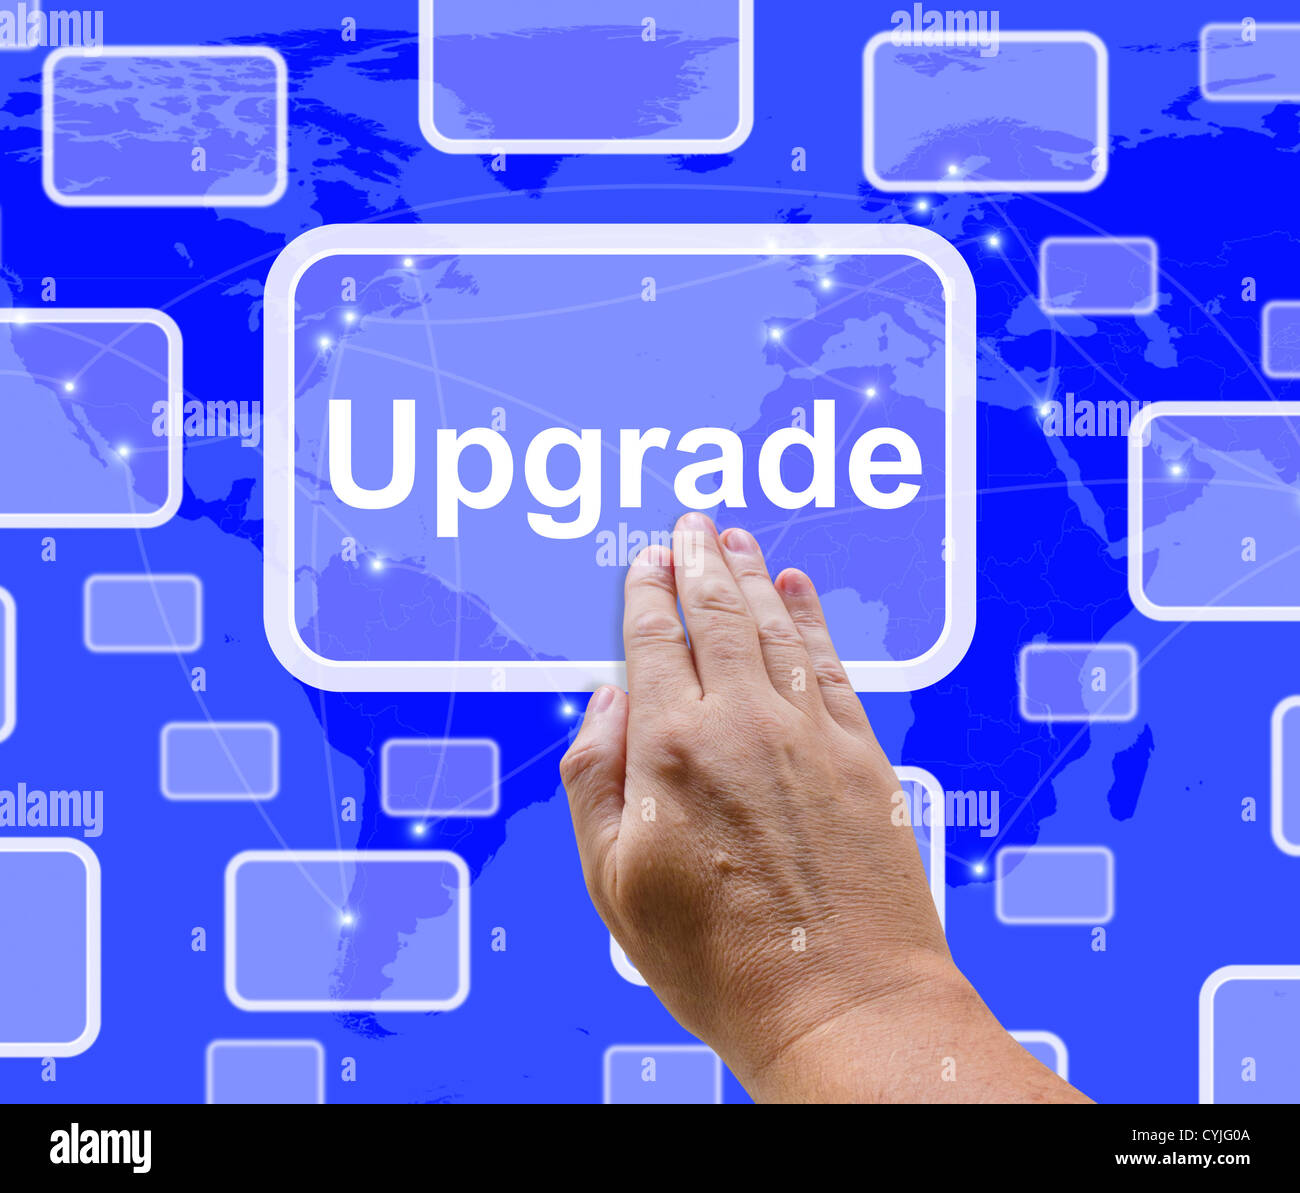 Upgrade Button Showing Software Updates To Improve Applications Stock Photo